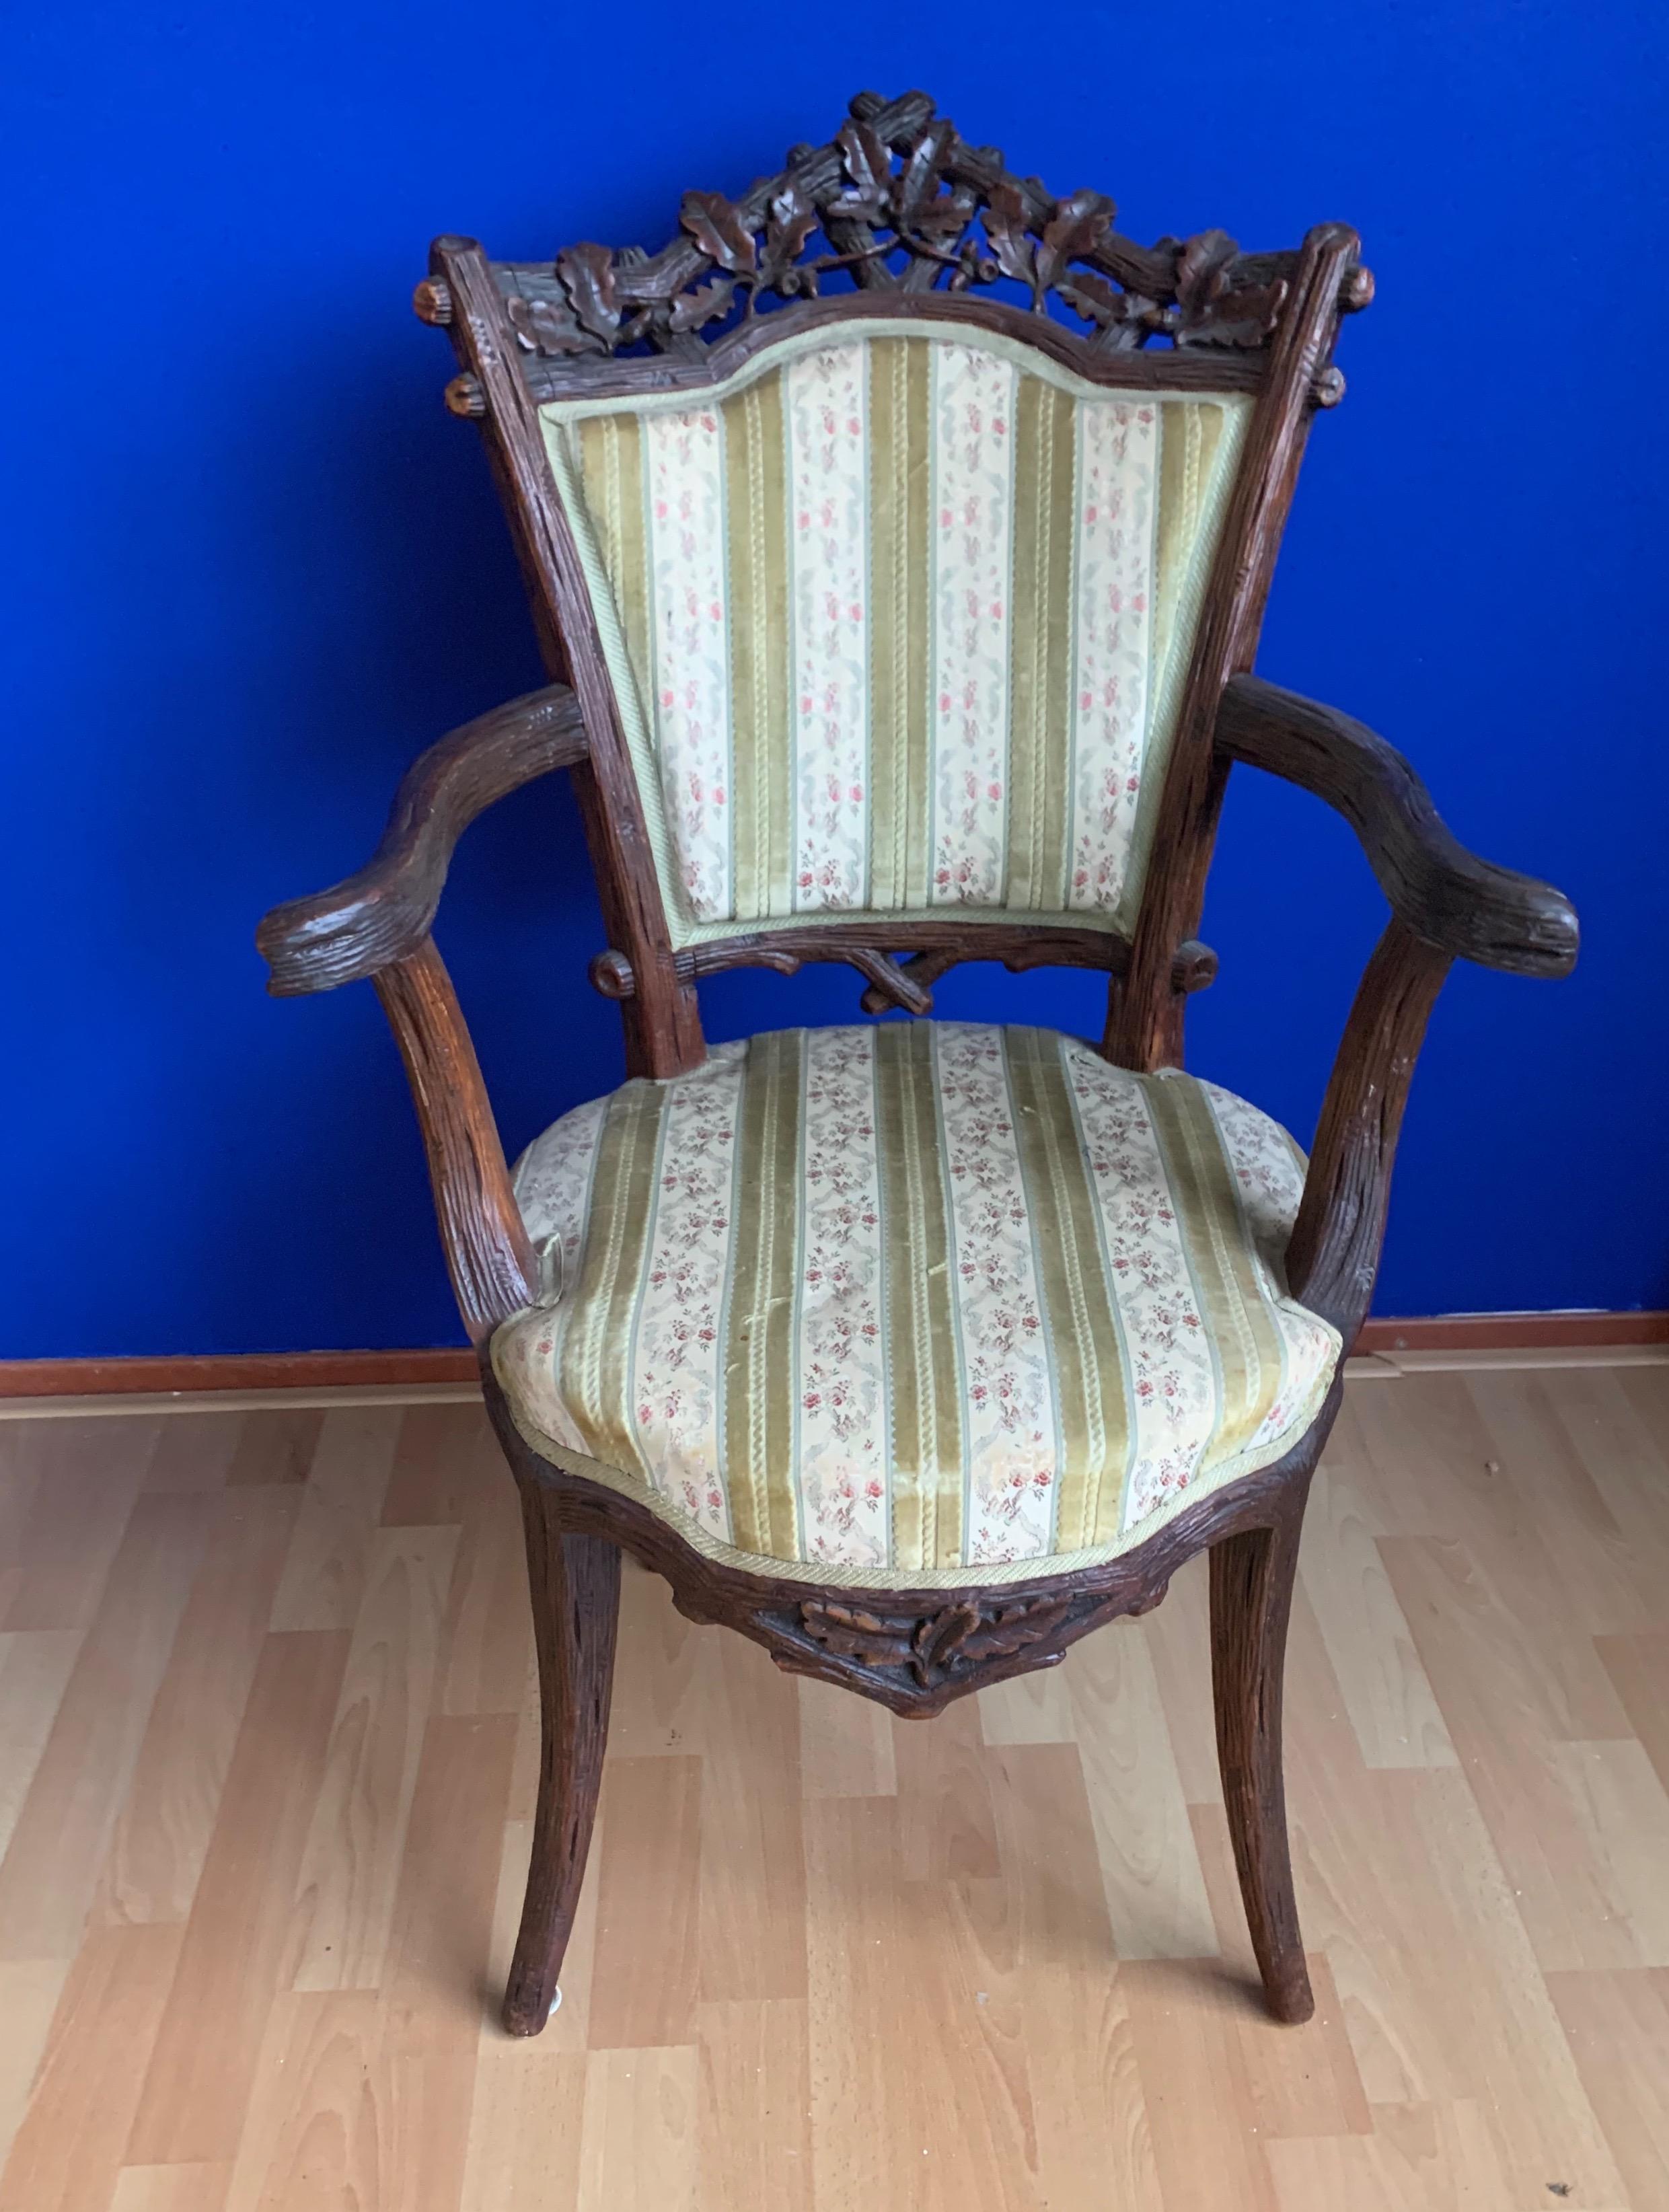 Rare 19th Century Black Forest Walnut Armchair by Horrix with Classy Upholstery For Sale 5